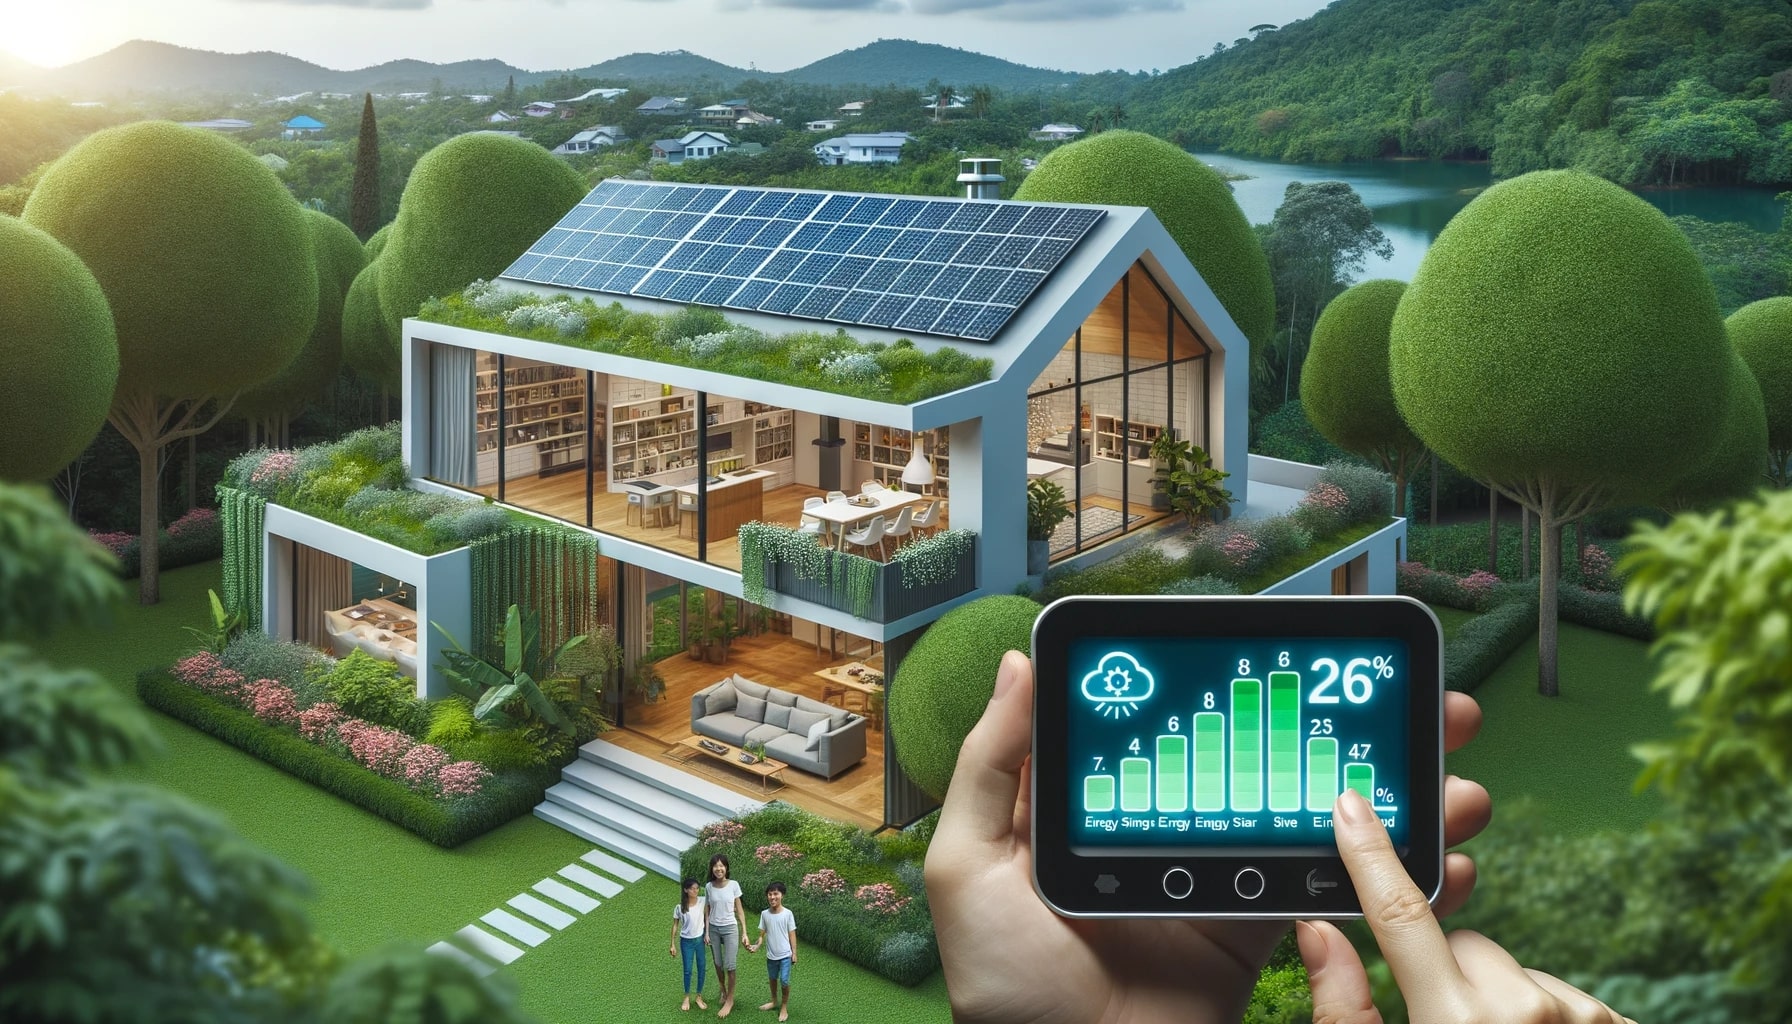 A person holding a smart phone with solar panels on the roof of a house, explaining How to Ensure Your Home is Environmentally Friendly.